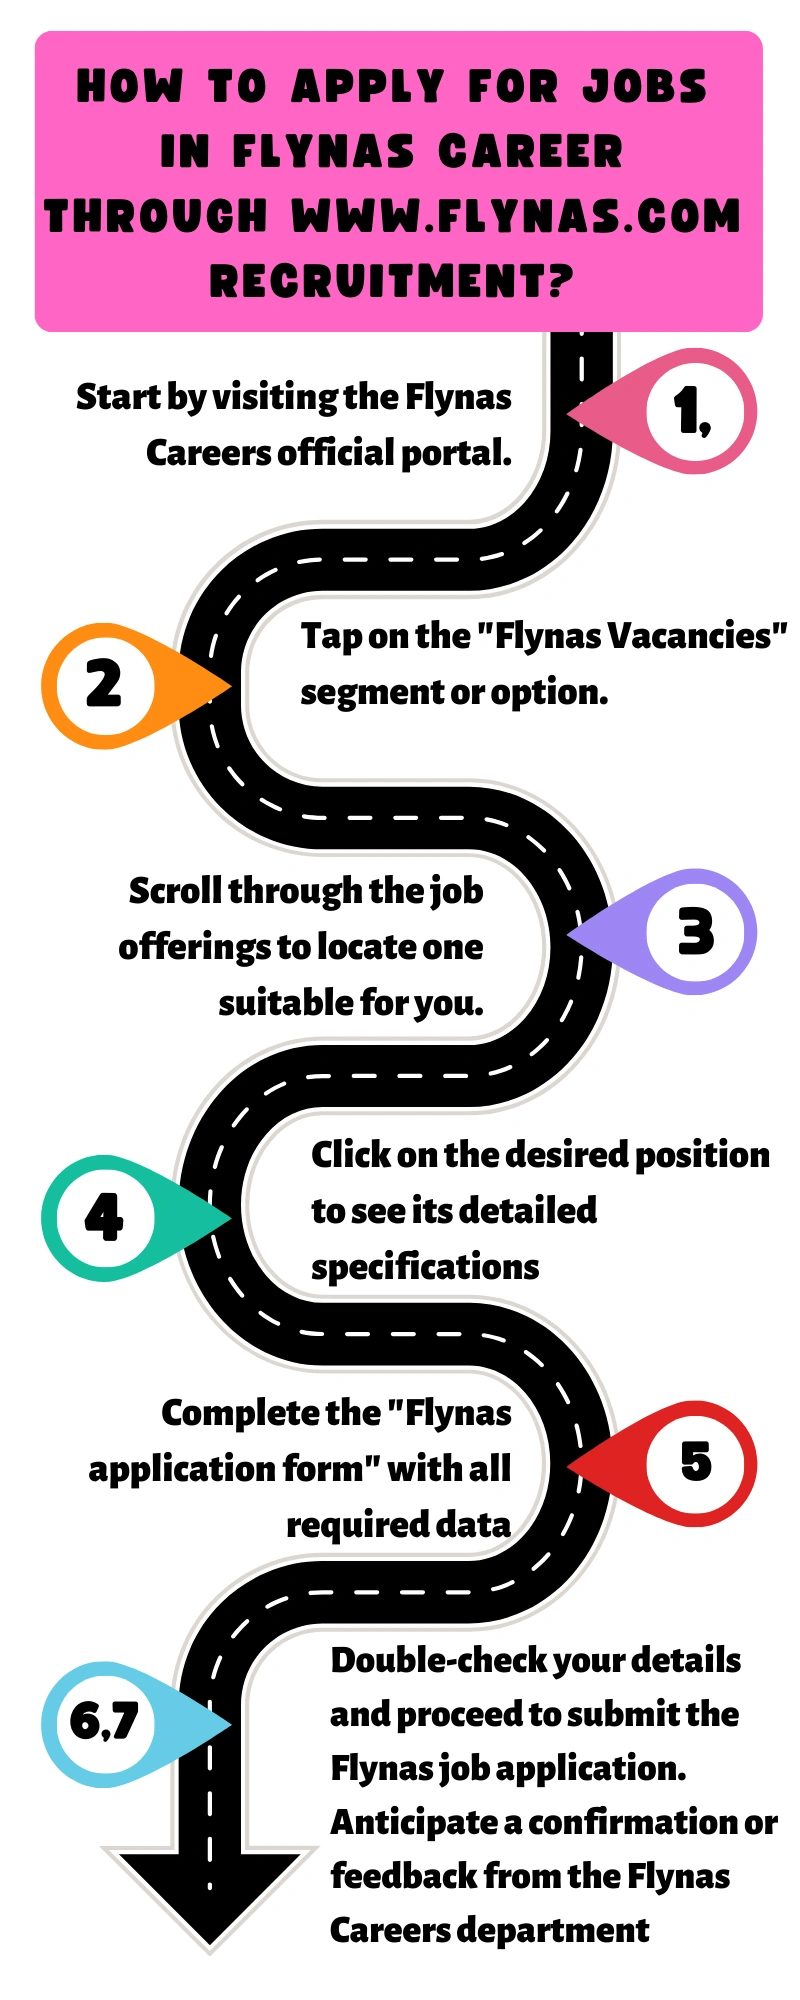 How to Apply for Jobs in Flynas Career through www.flynas.com recruitment?